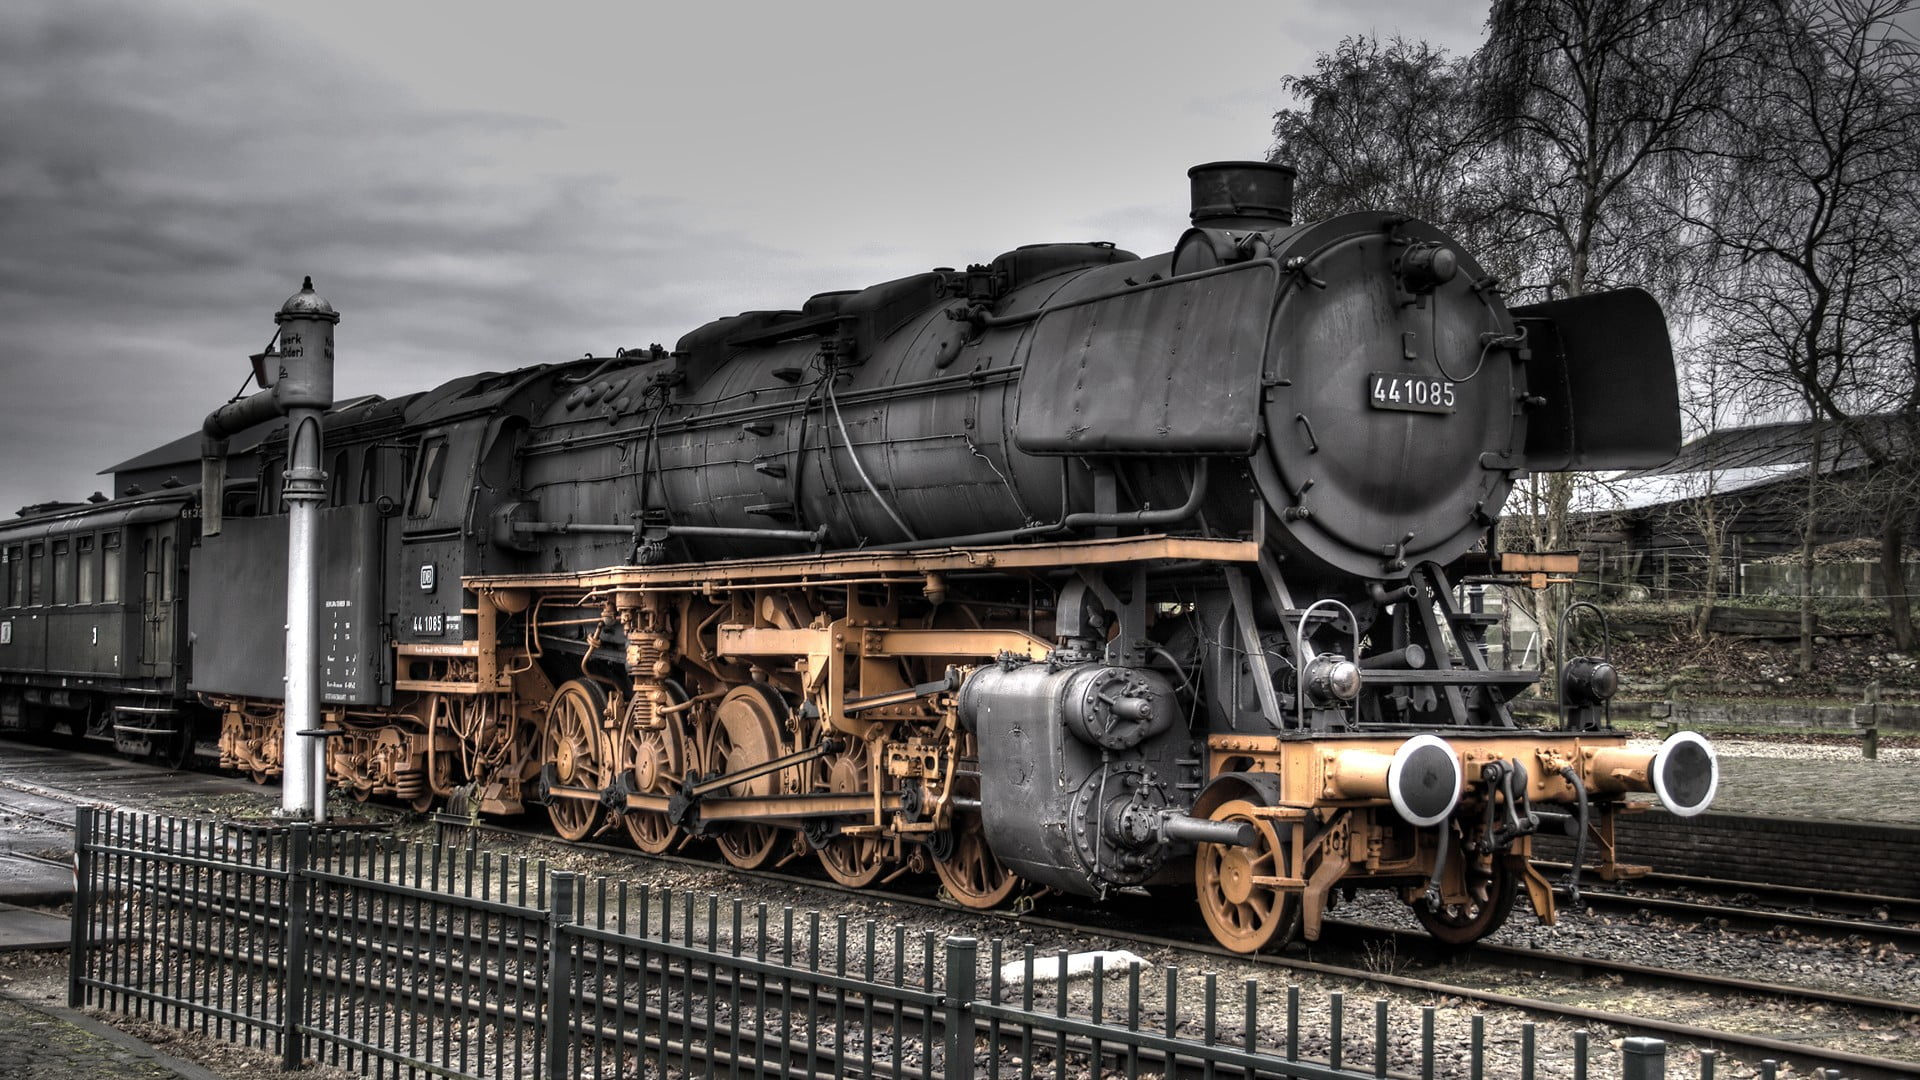 Vintage black and brown train, train station, railway, HDR, steam locomotive wallpaper, HDR, Empty